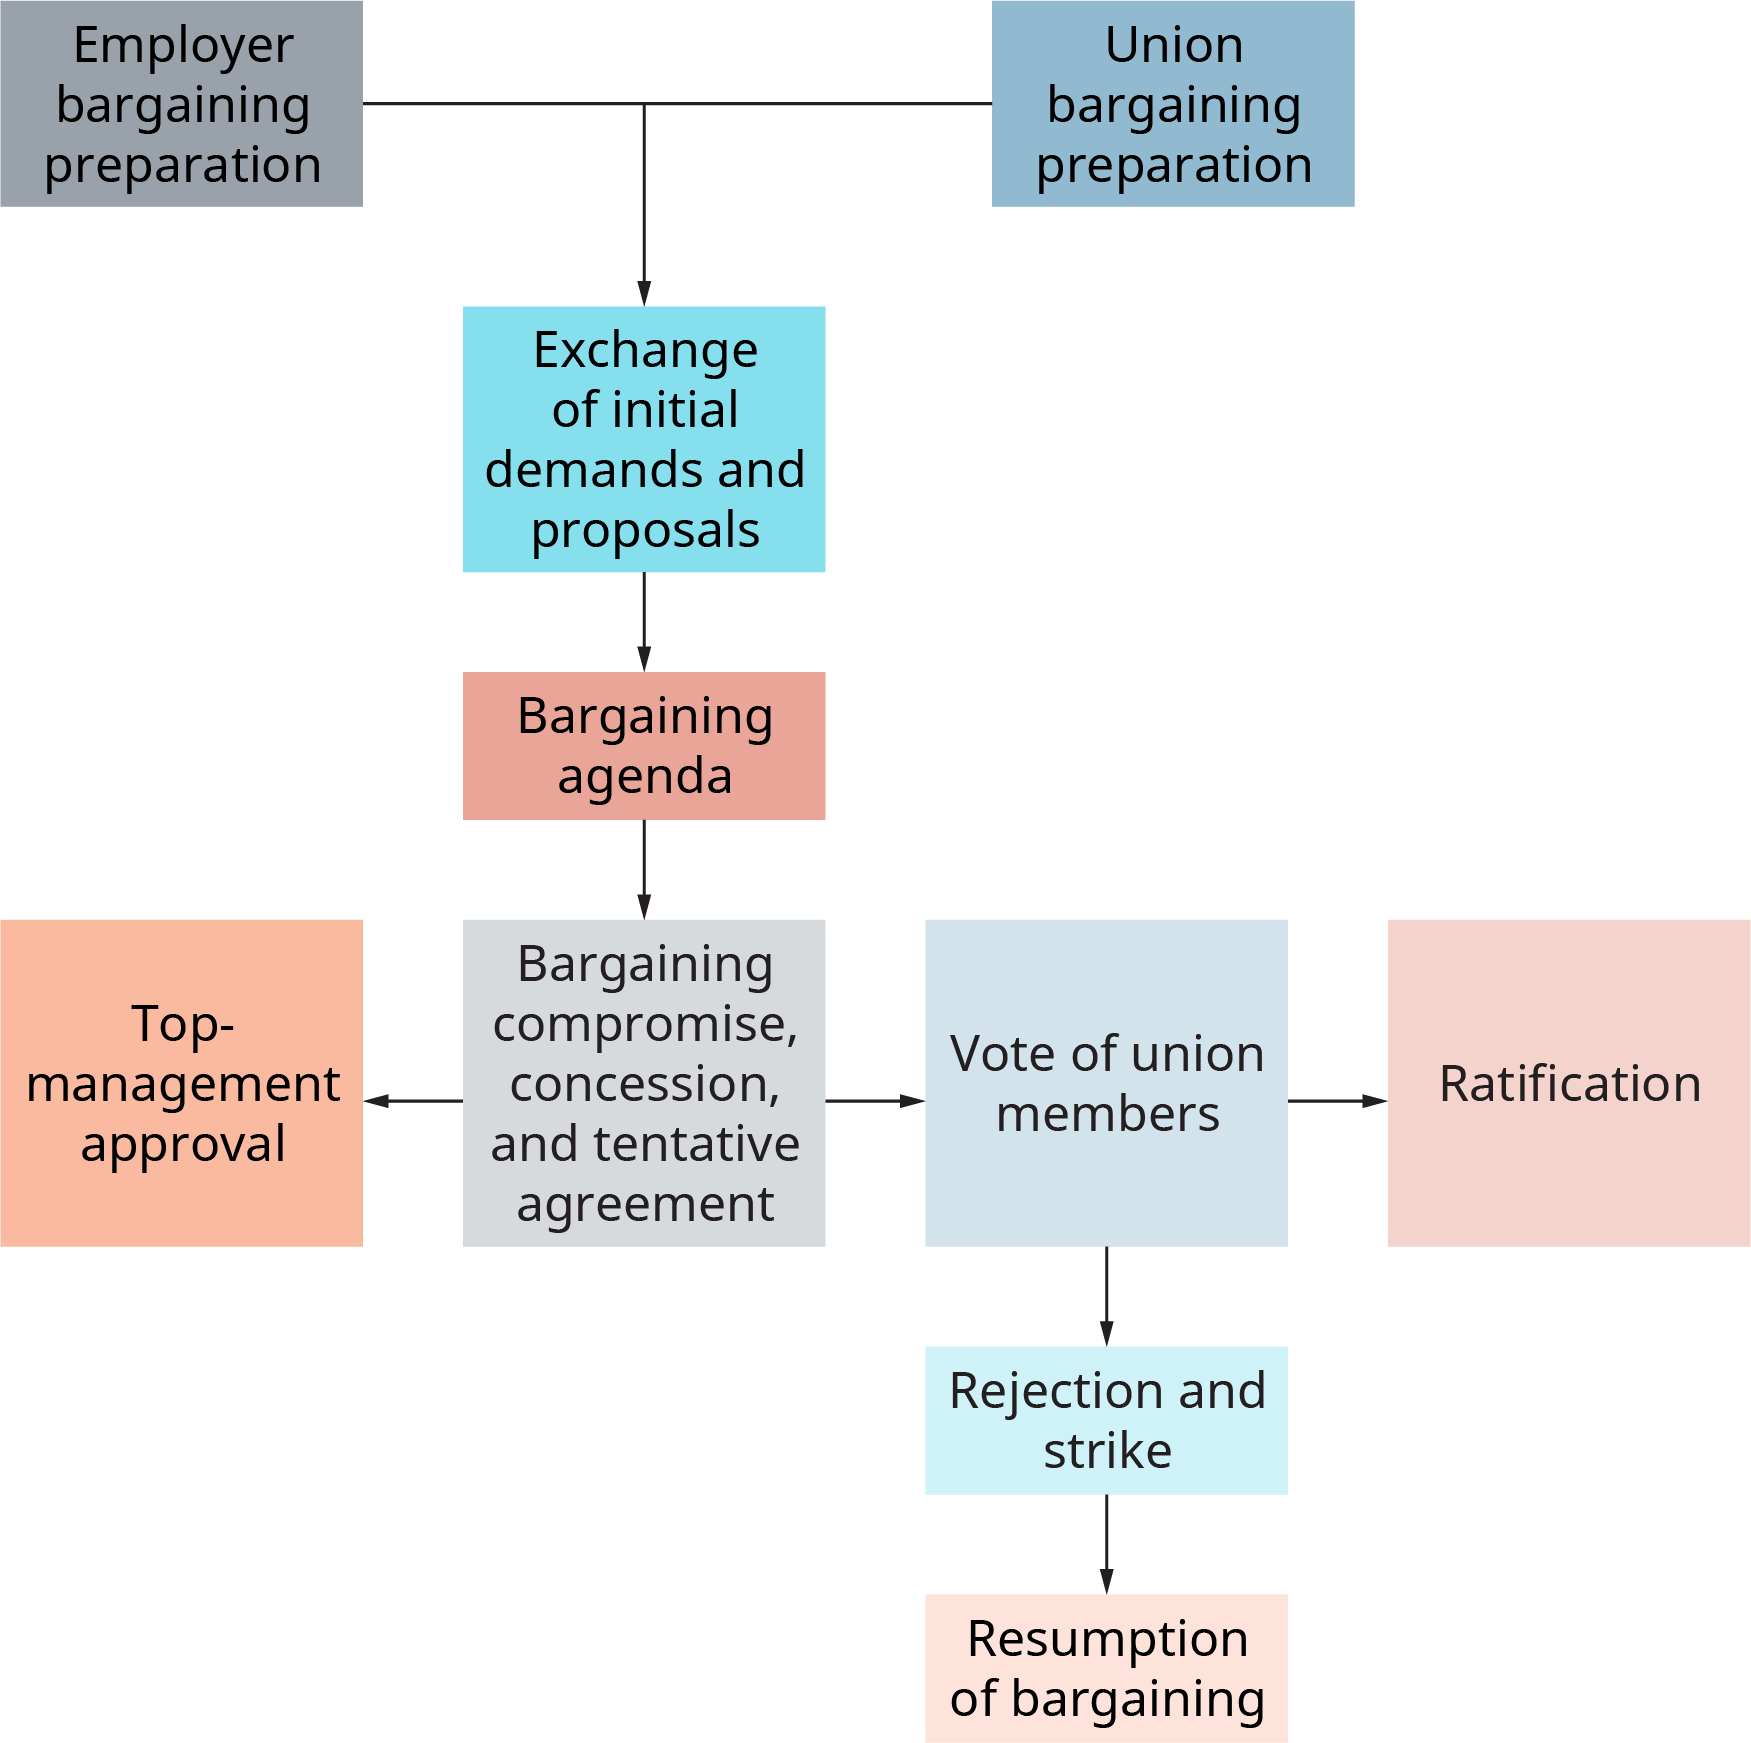 The chart starts with two separate boxes, one labeled employer bargaining preparation, and the other label reads union bargaining preparation. These both flow into a box labeled exchange of initial demands and proposals. This flows into bargaining agenda. This flows into bargaining compromise, concession, and tentative agreement. This branches in two directions. In one direction, it branches to top management approval. This is the end of this branch. In the other direction, it flows into vote of union members. This then flows into 2 directions. In one direction, it branches to ratification, which is the end of this branch. In the other direction, it flows into rejection and strike, which then flows into resumption of bargaining. This is the end of the flow chart.